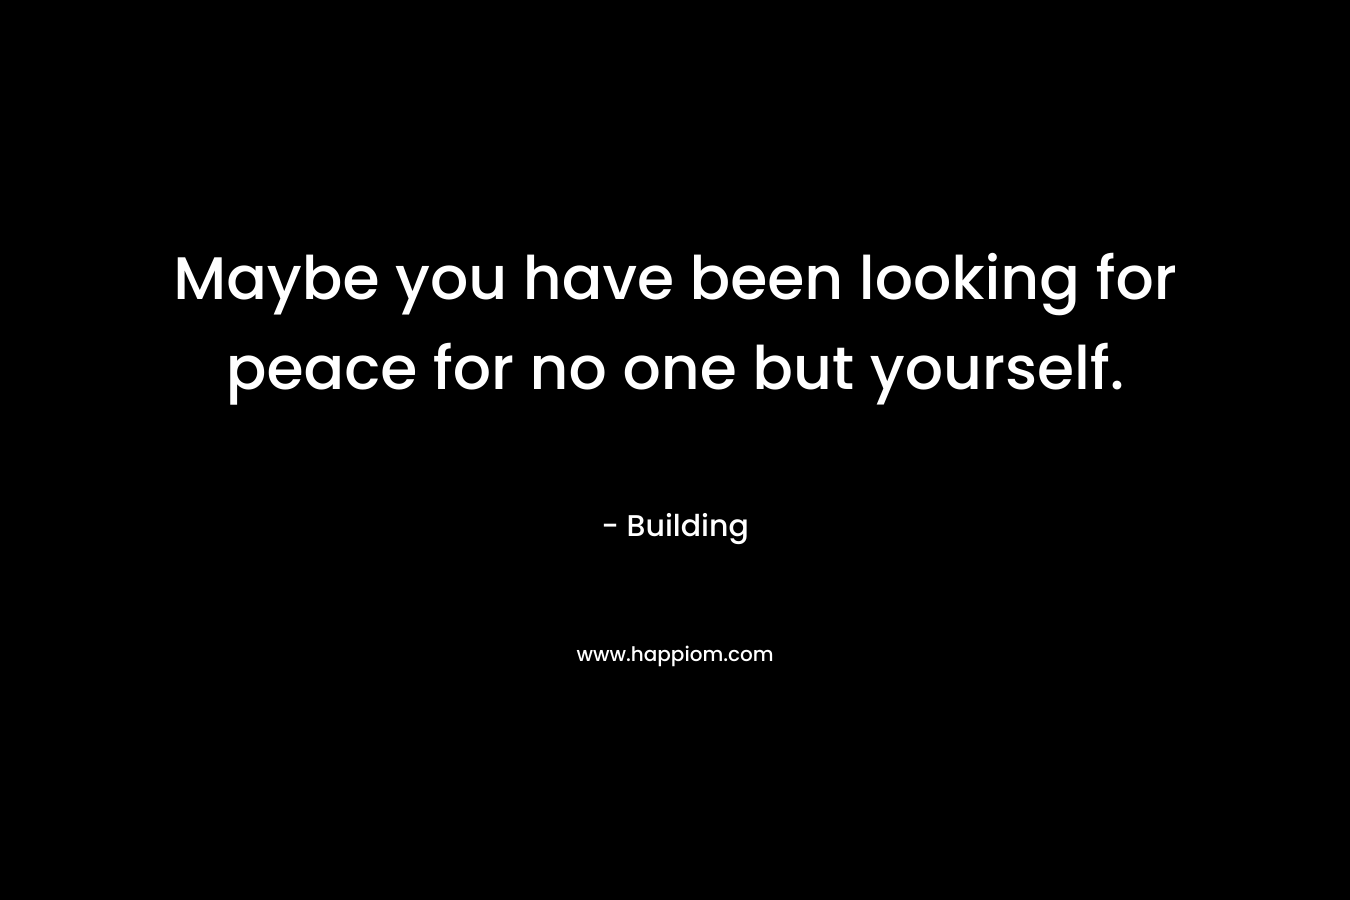 Maybe you have been looking for peace for no one but yourself.